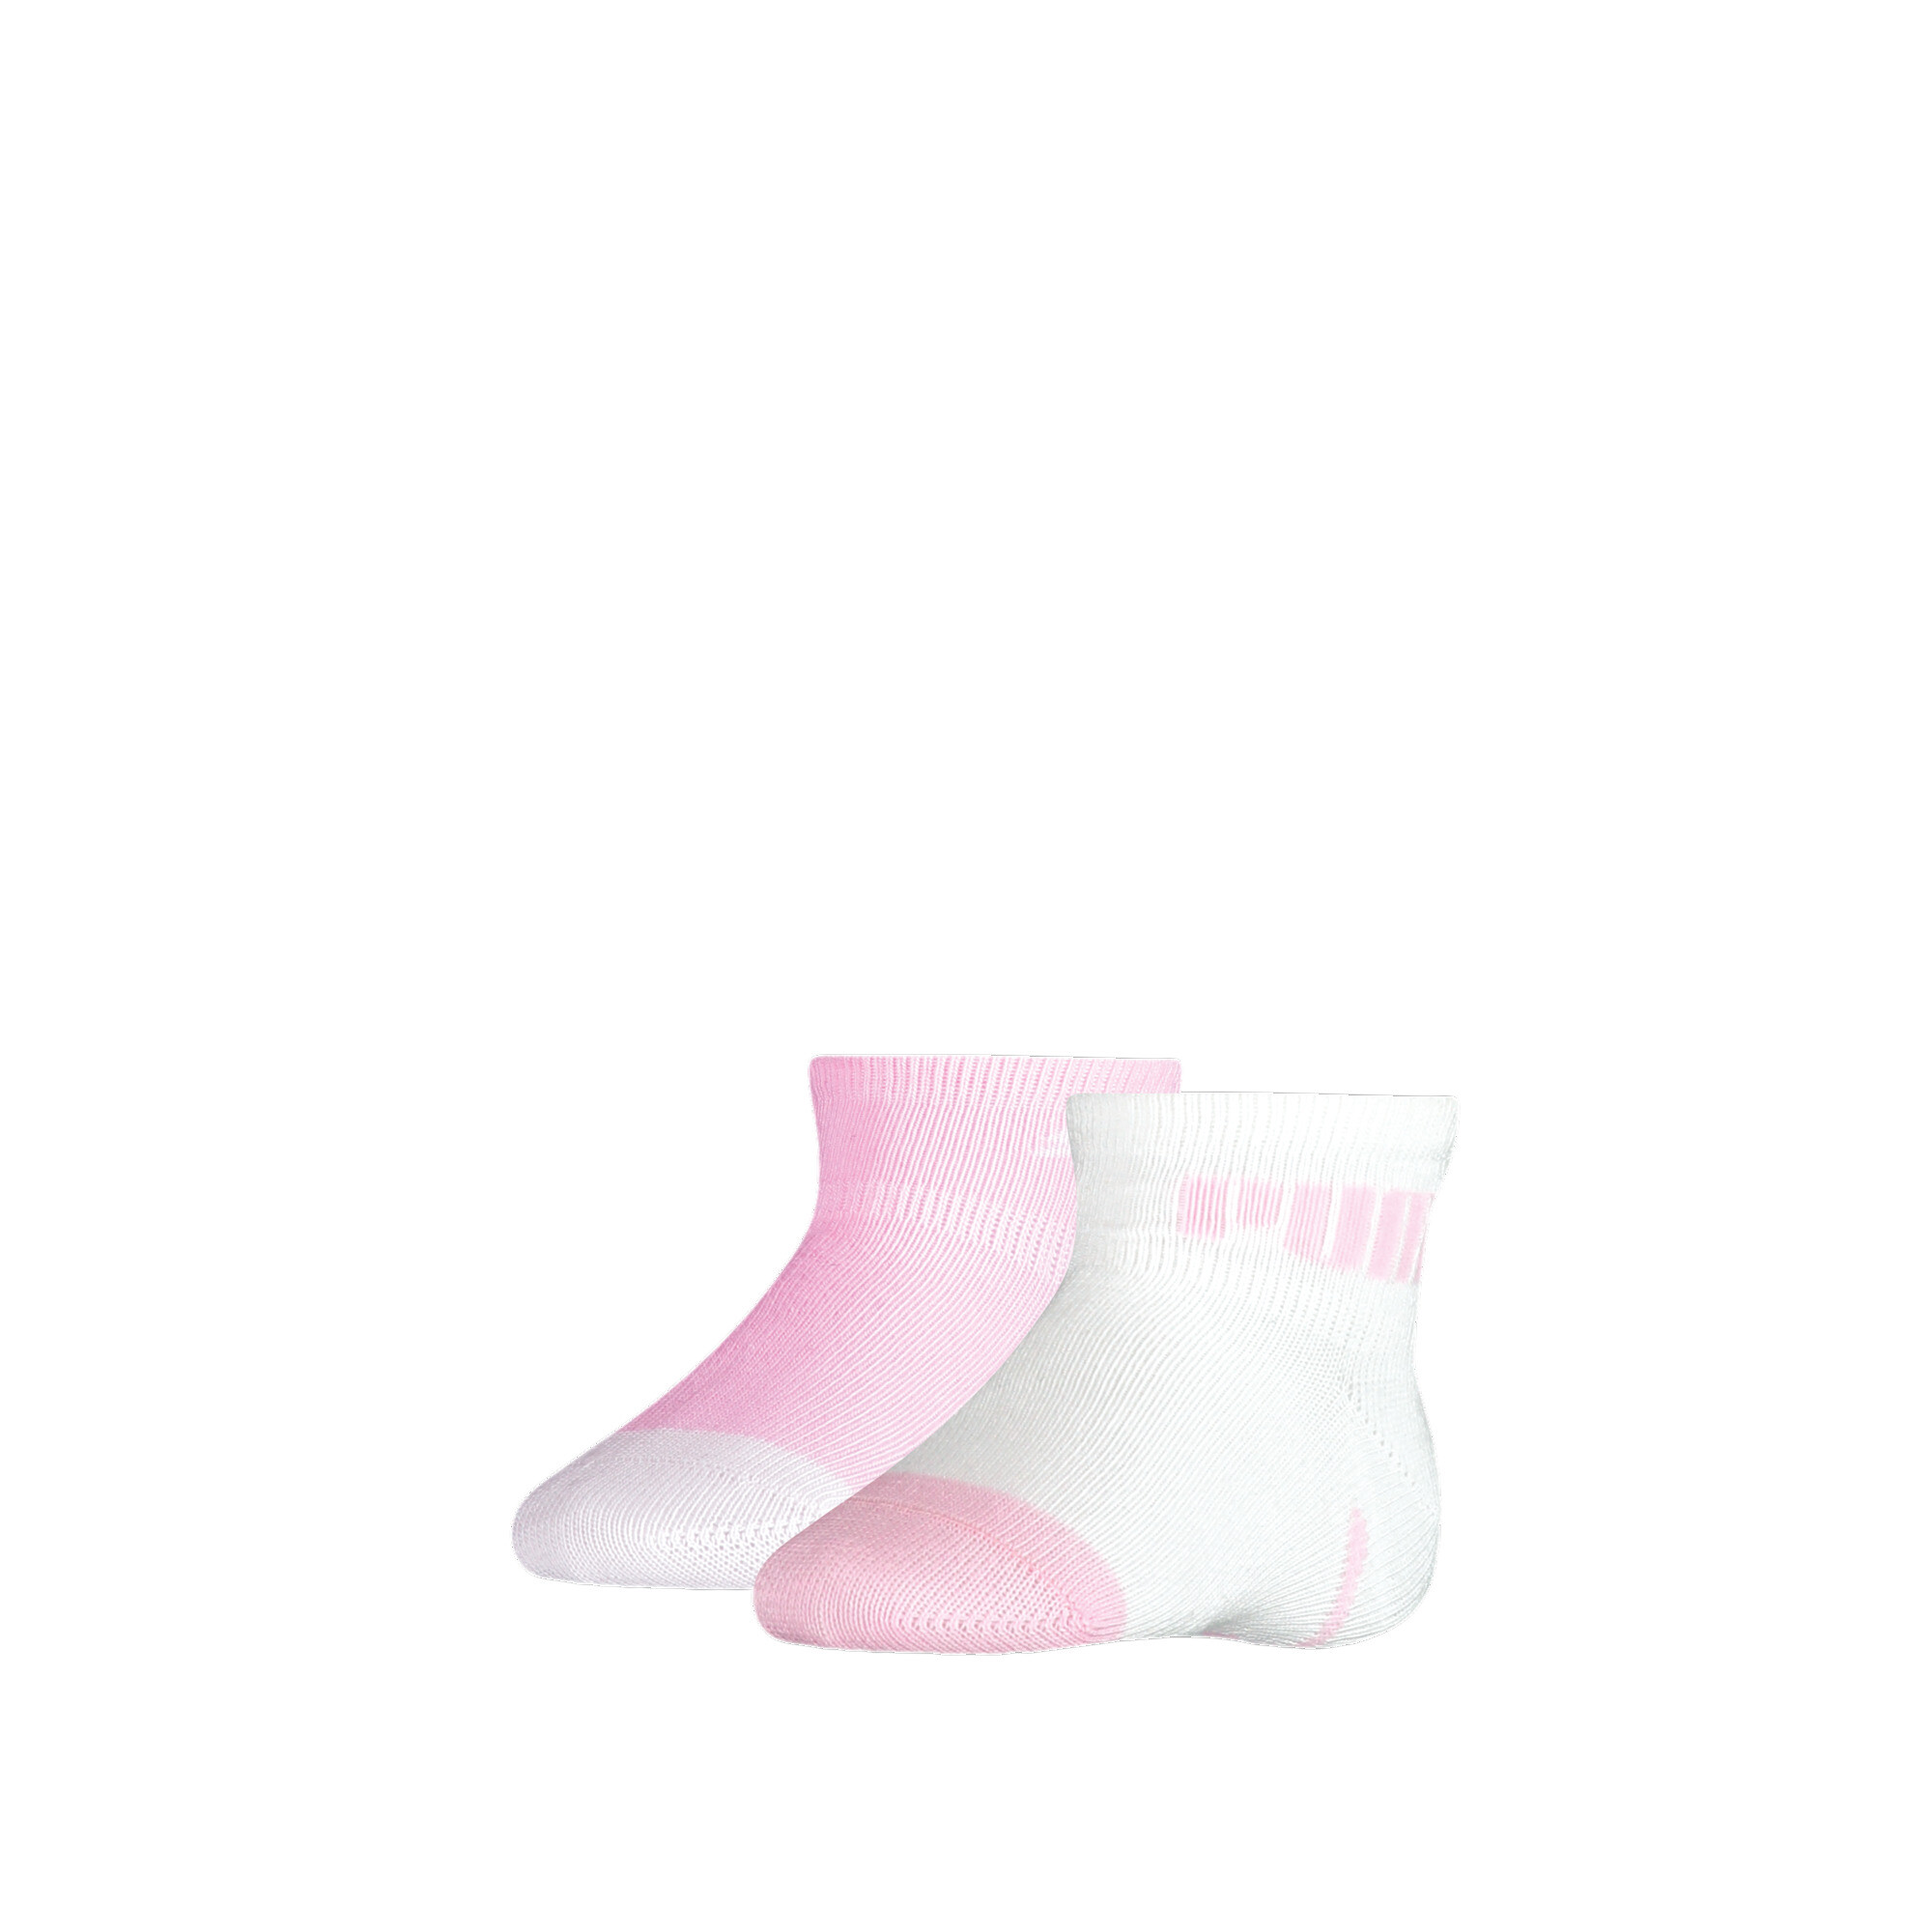 Kids' PUMA Baby Mini Cats Lifestyle Socks 2 Pack In Pink, Size 27-30